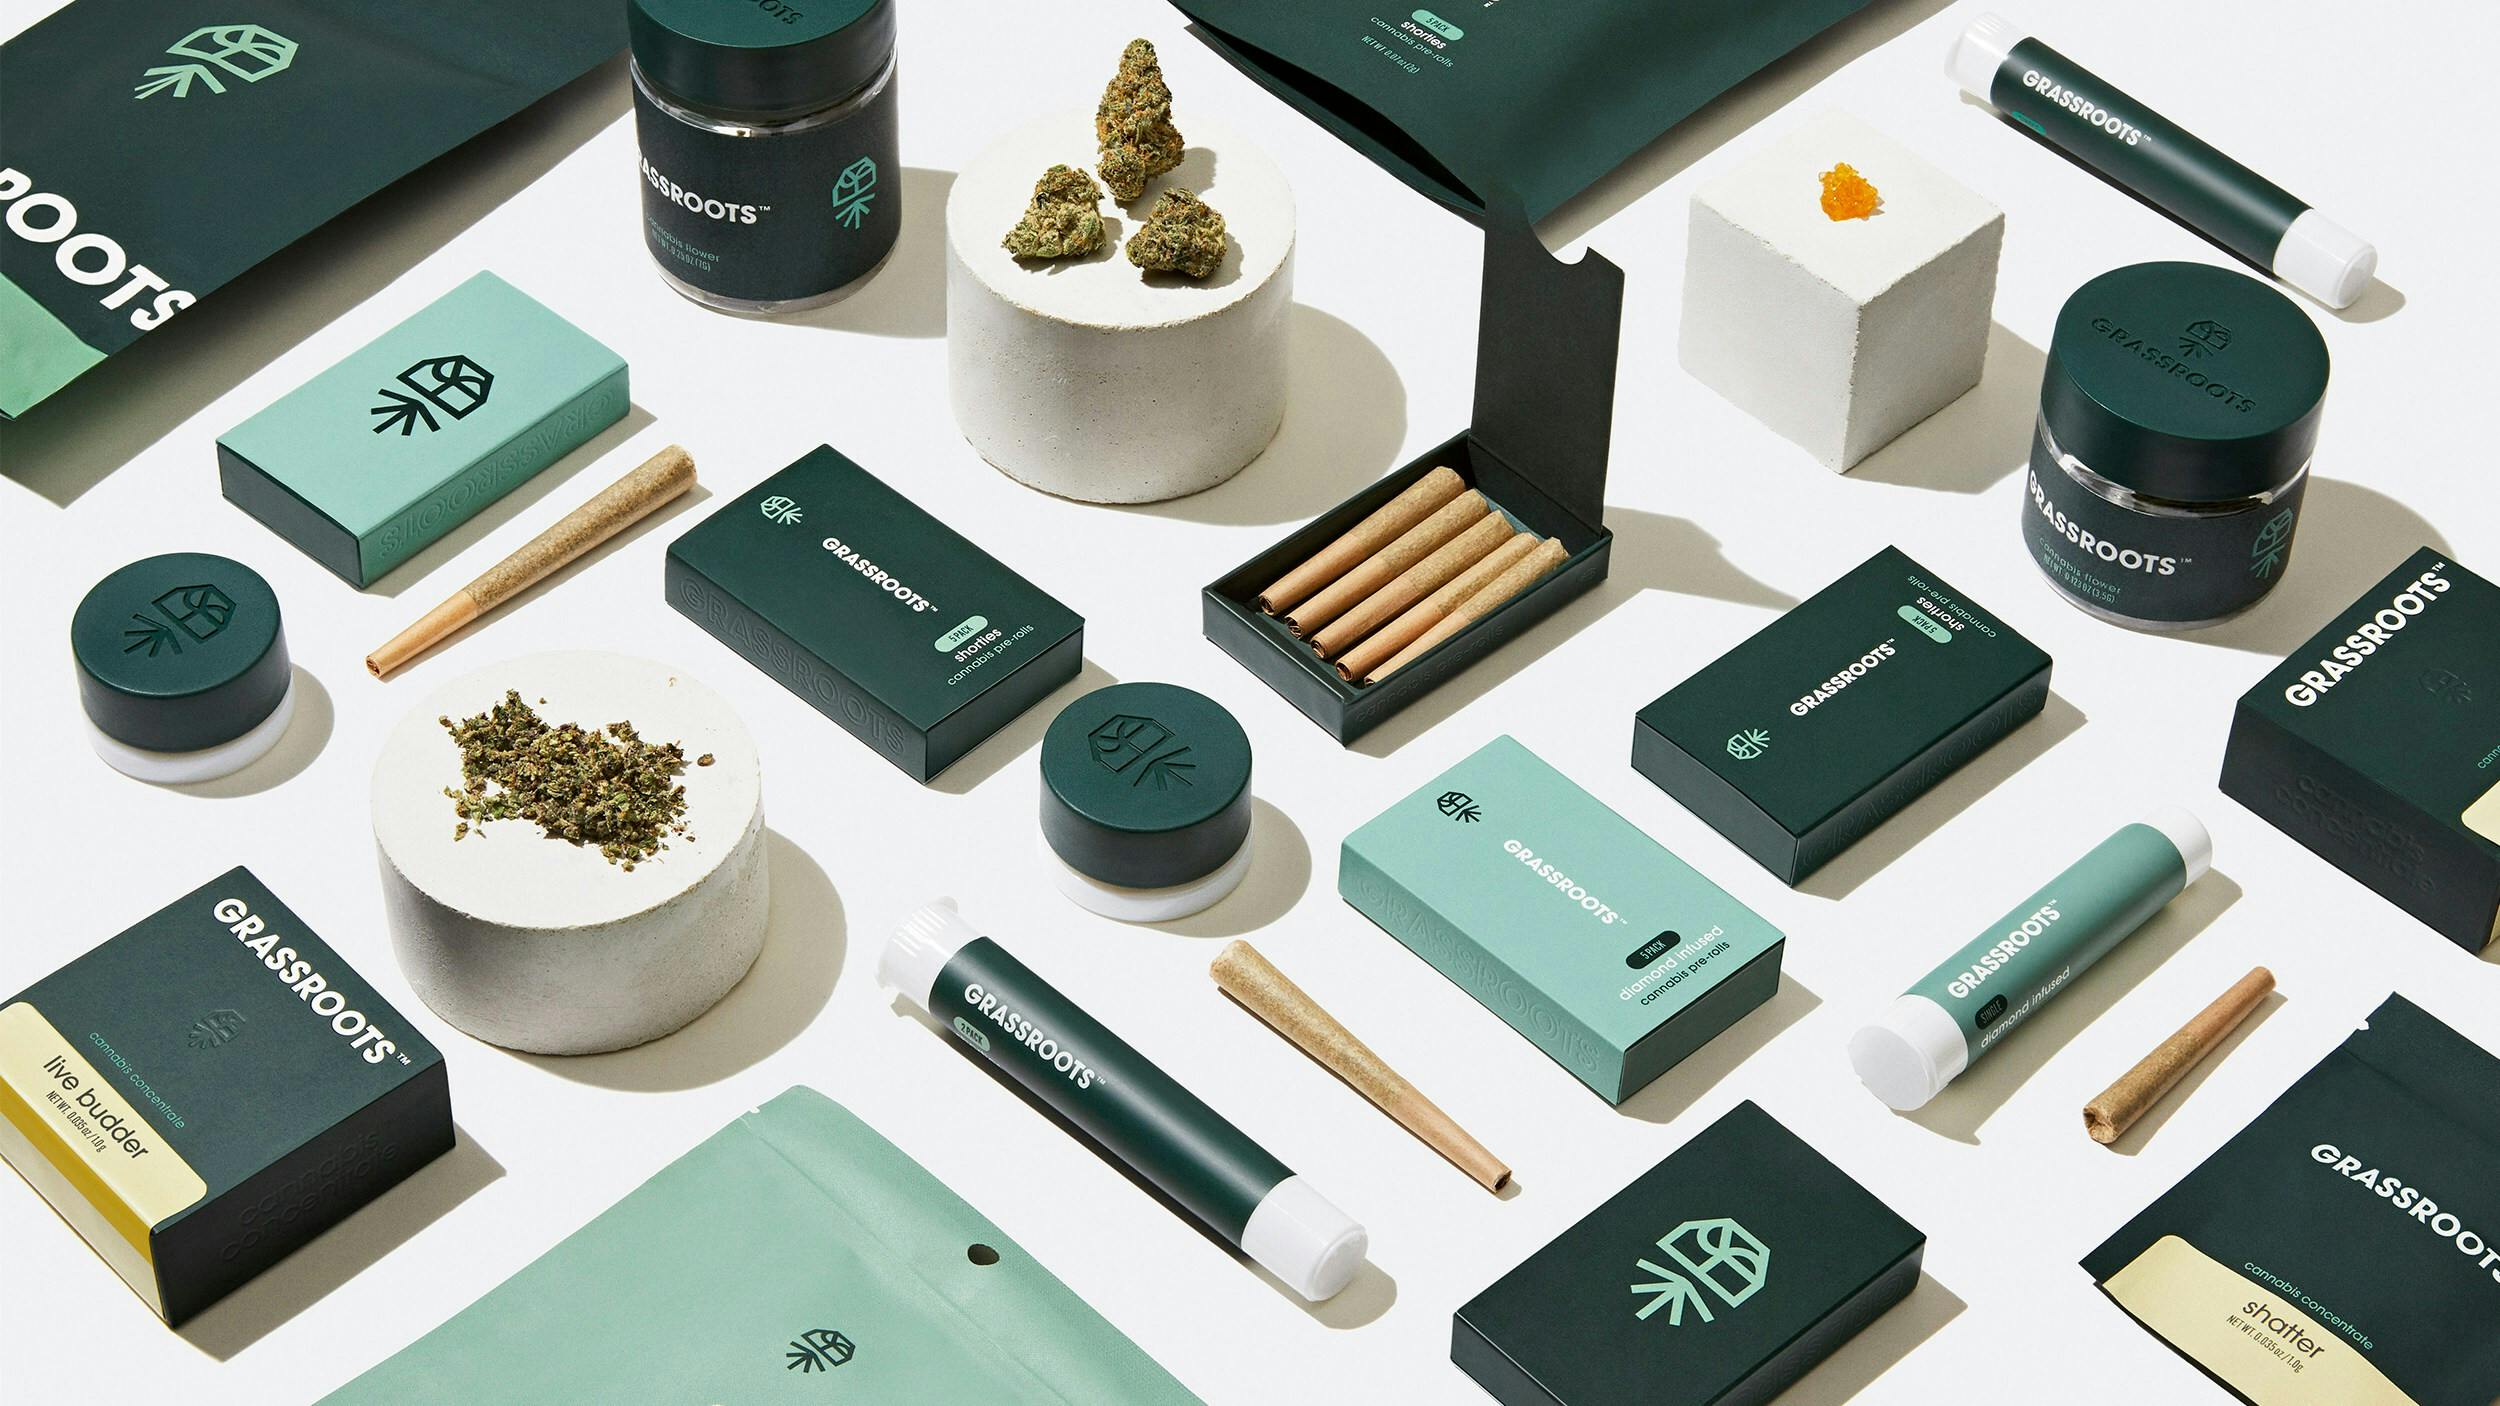 Curaleaf's Grassroots Cannabis Brand Launches In New Jersey